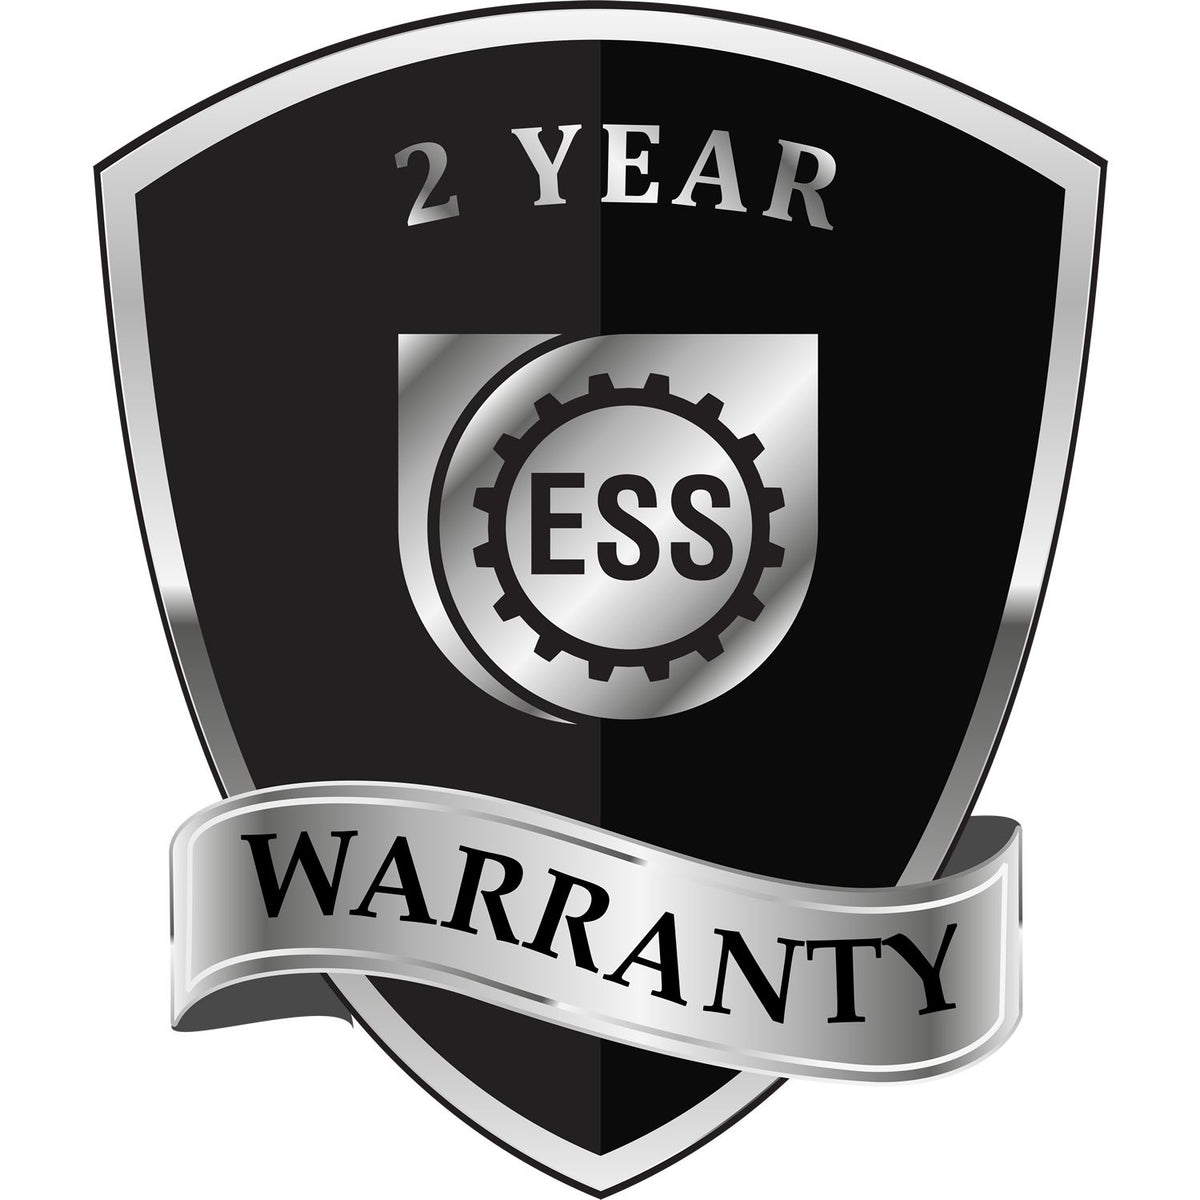 A black and silver badge or emblem showing warranty information for the Soft New Mexico Professional Geologist Seal